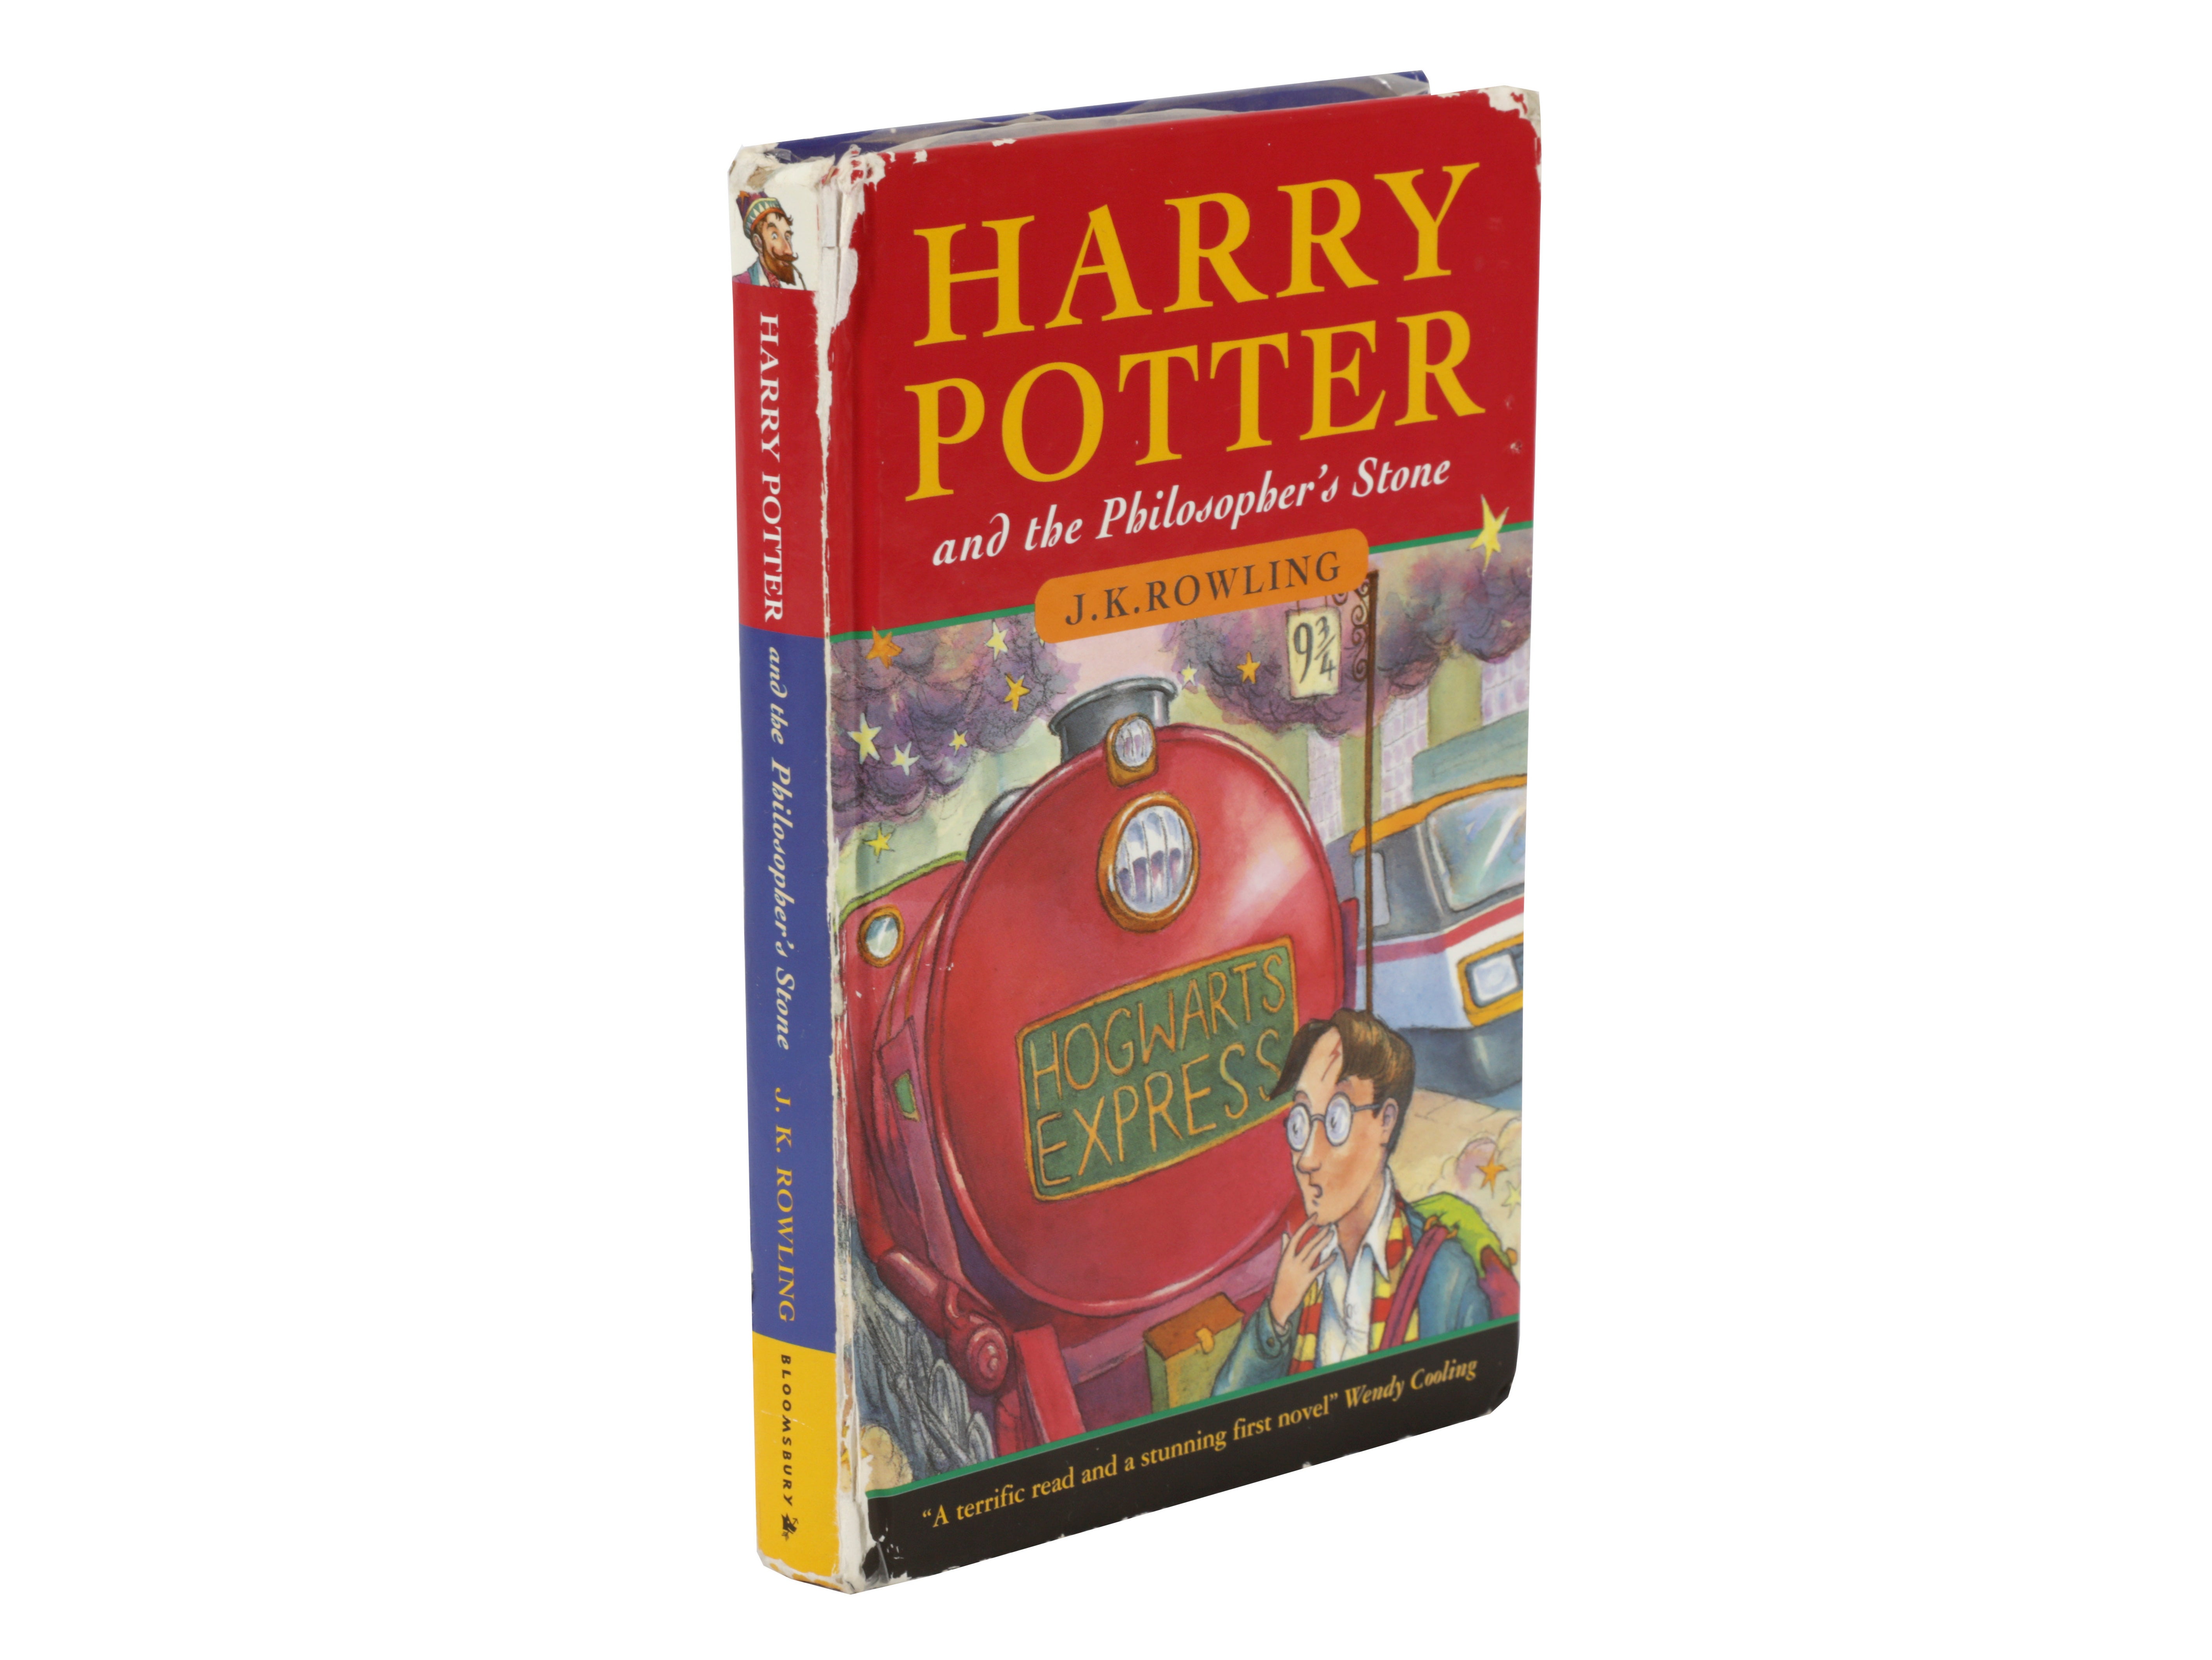 Only 500 copies of the first edition of ‘Harry Potter and the Philosopher’s Stone’ were printed